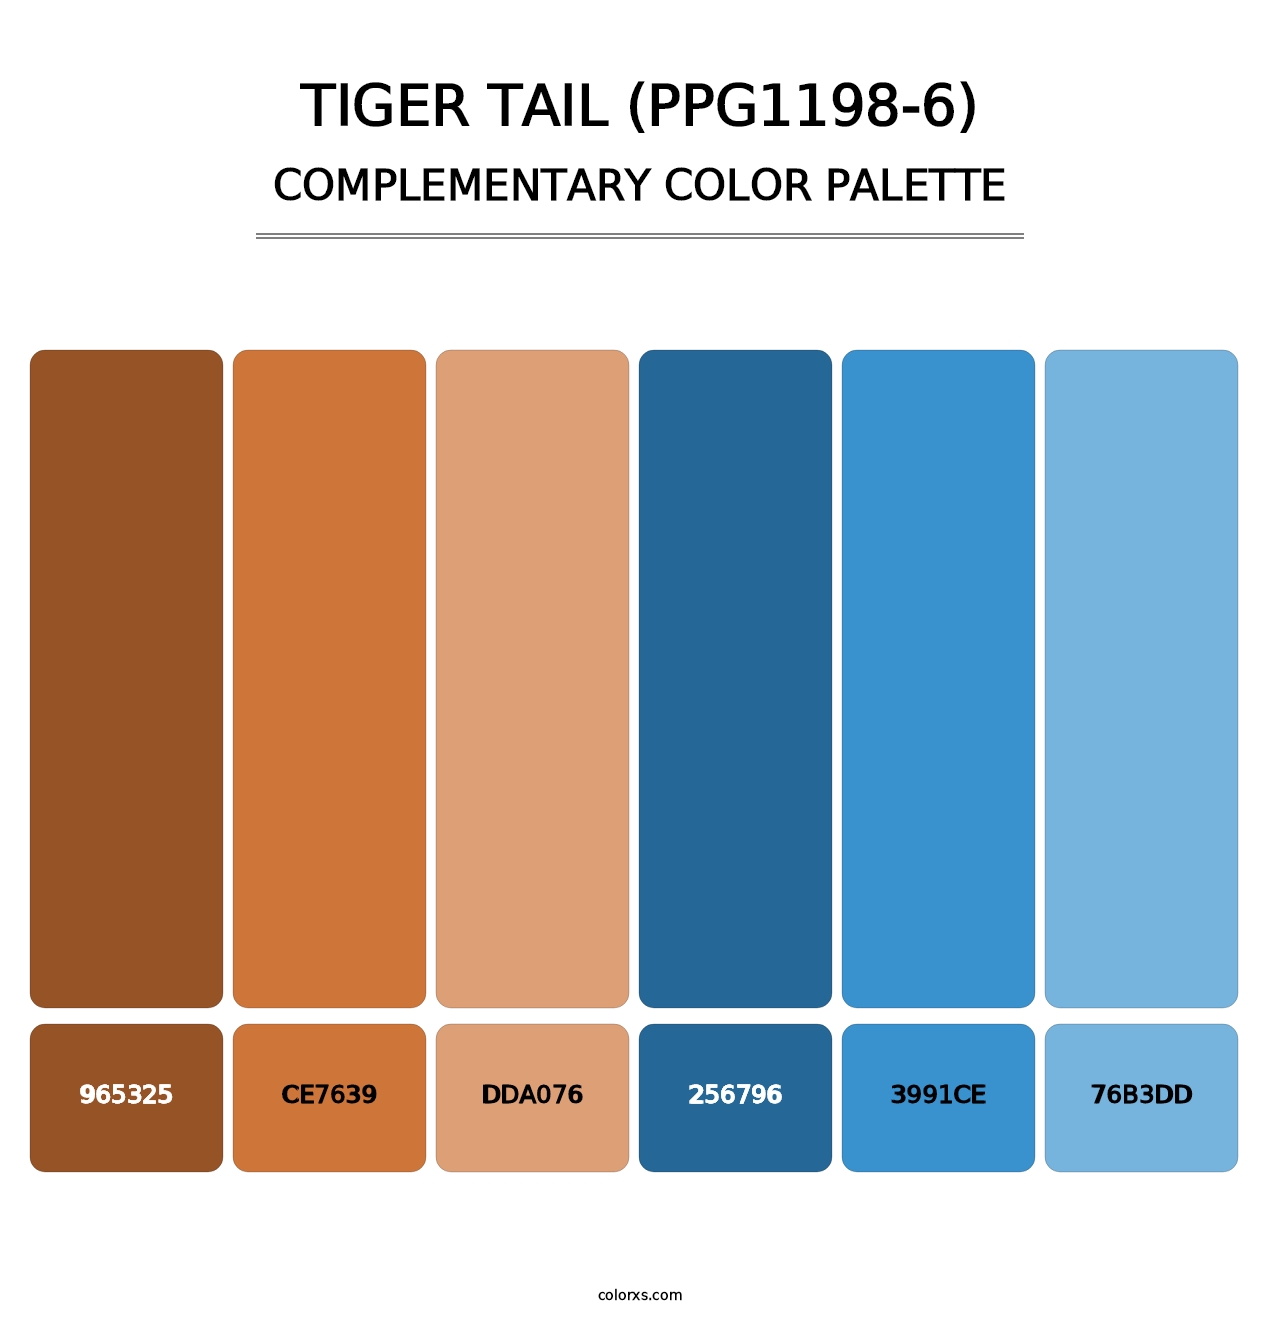 Tiger Tail (PPG1198-6) - Complementary Color Palette